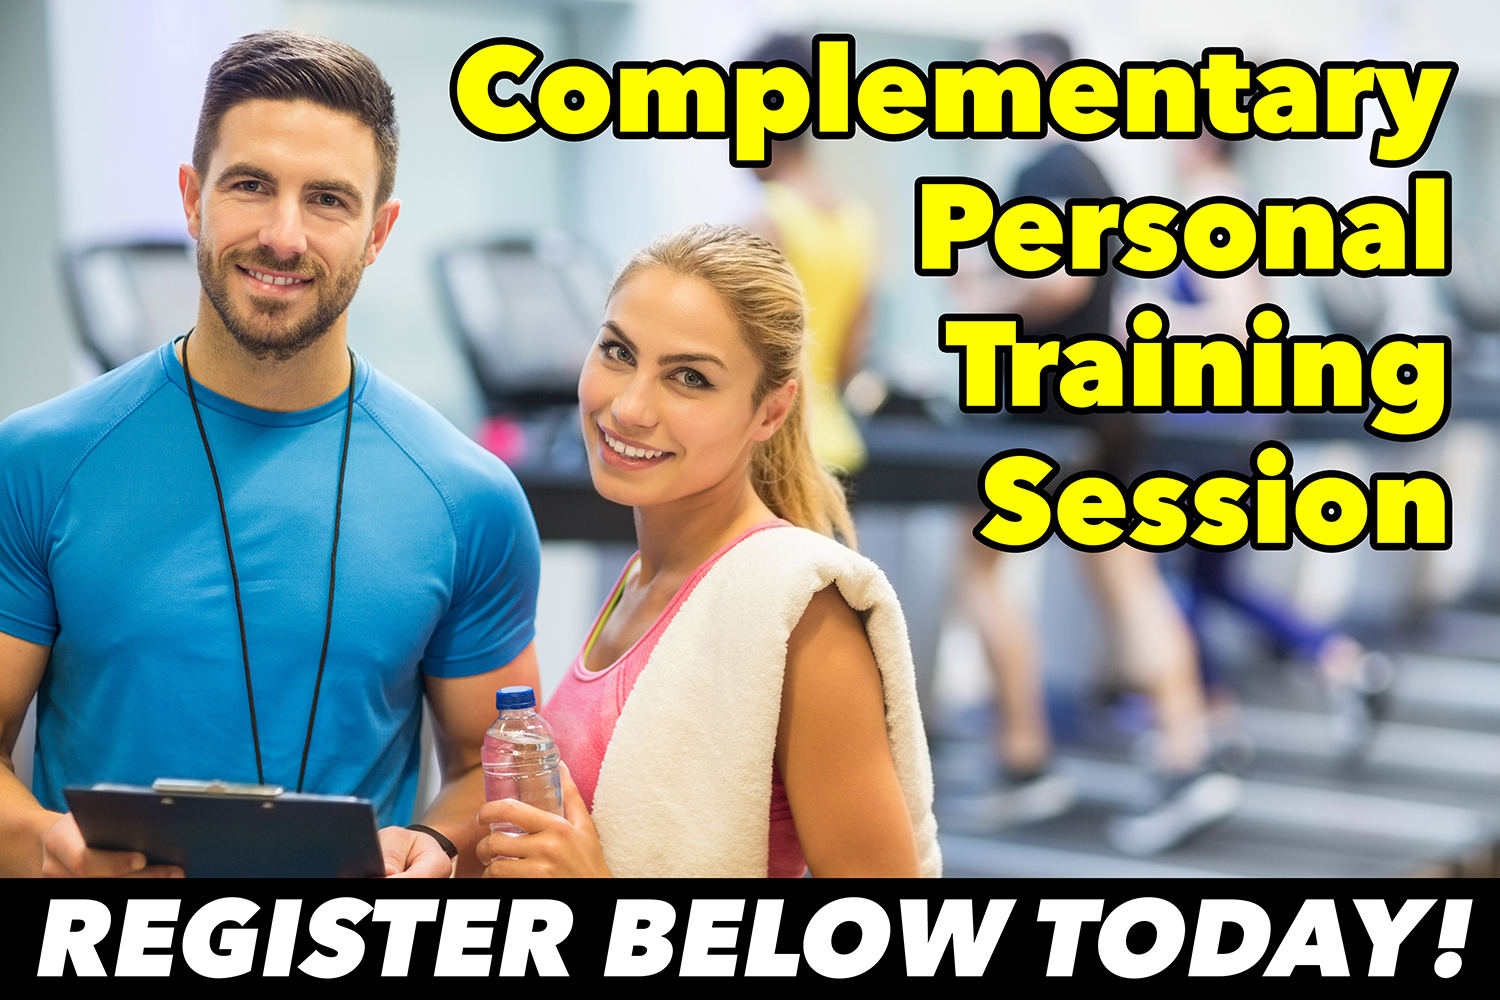 Complementary Personal Training Session